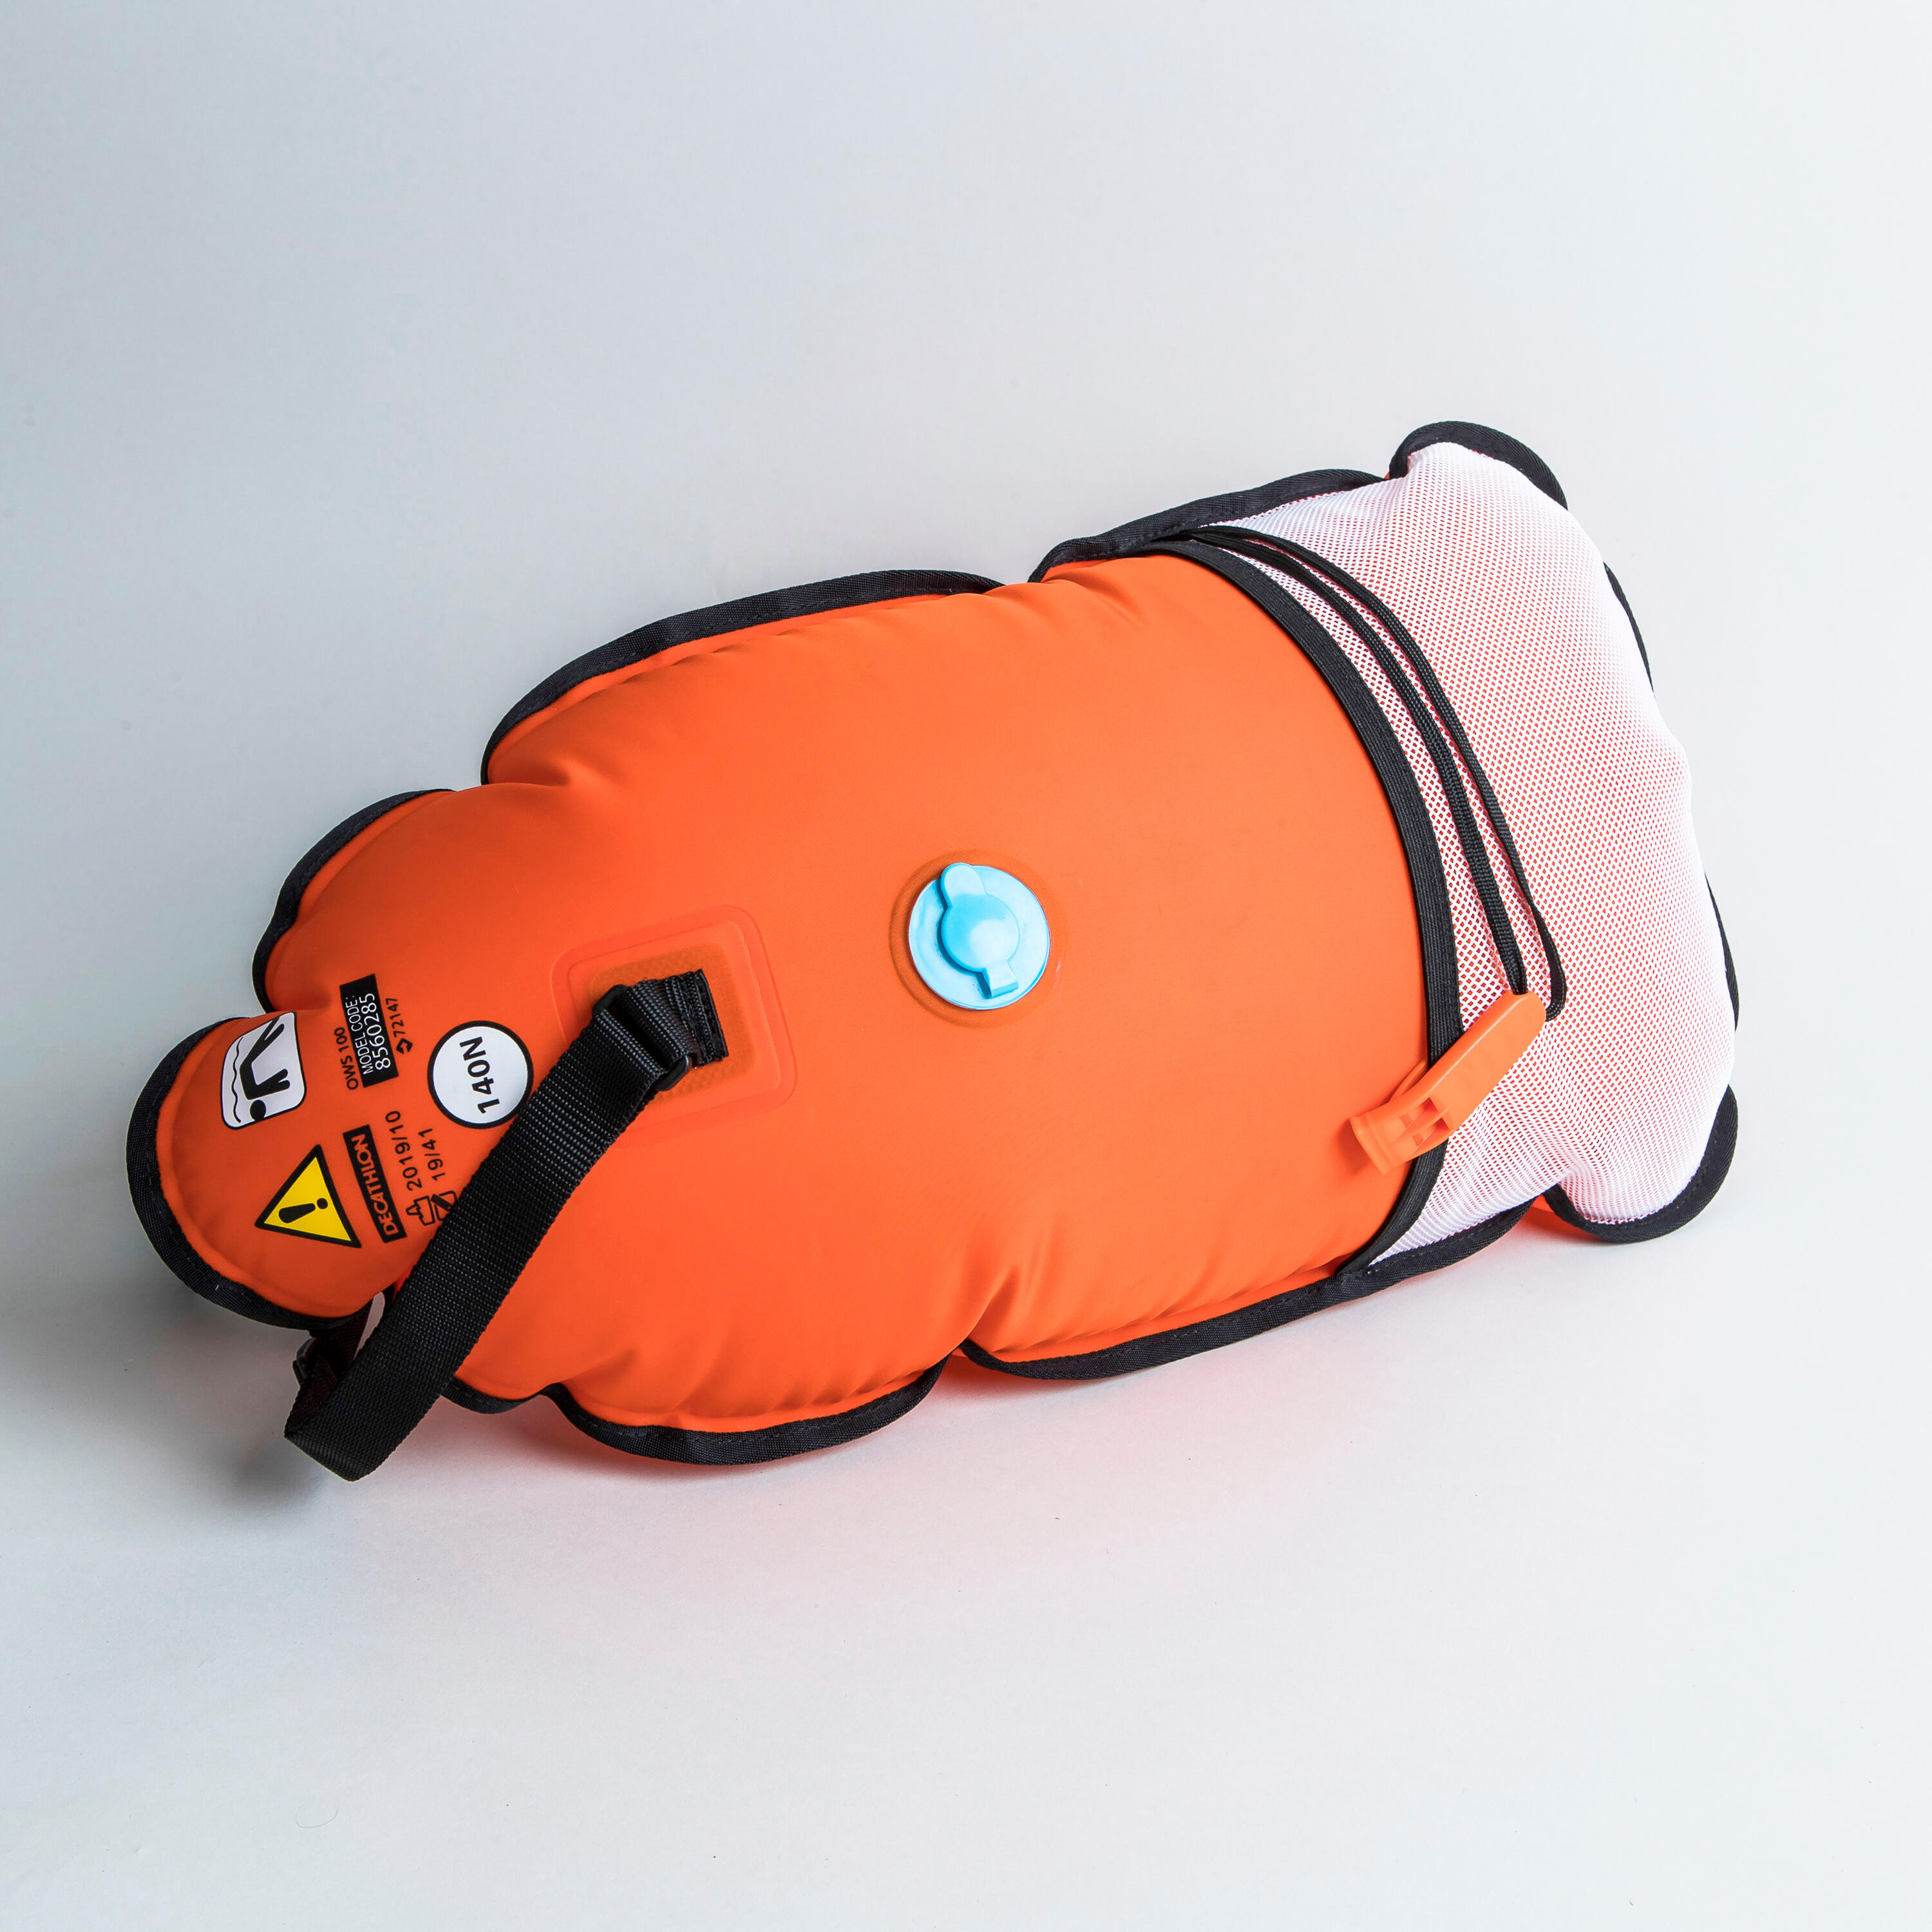 OWS 100 SWIM BUOY FOR USE IN OPEN WATER - NABAIJI